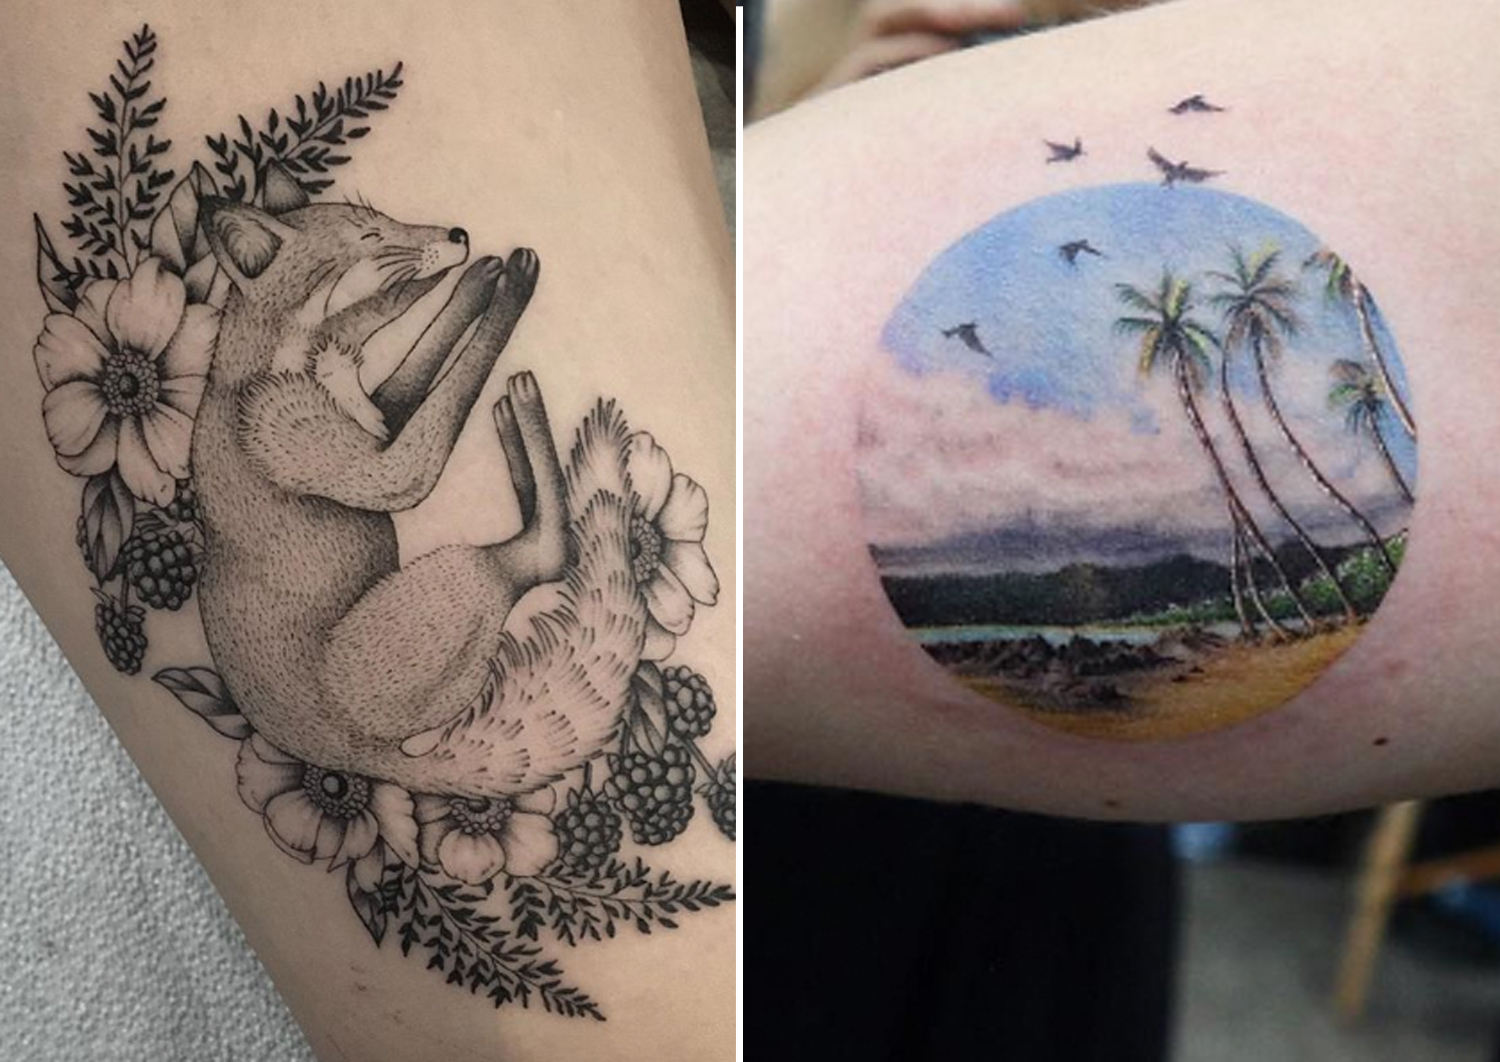 40 Stunning Nature-Inspired Tattoo Ideas For You To Get If You Love The  Outdoors & Traveling | Tree tattoo small, Tree tattoo, Nature tattoos